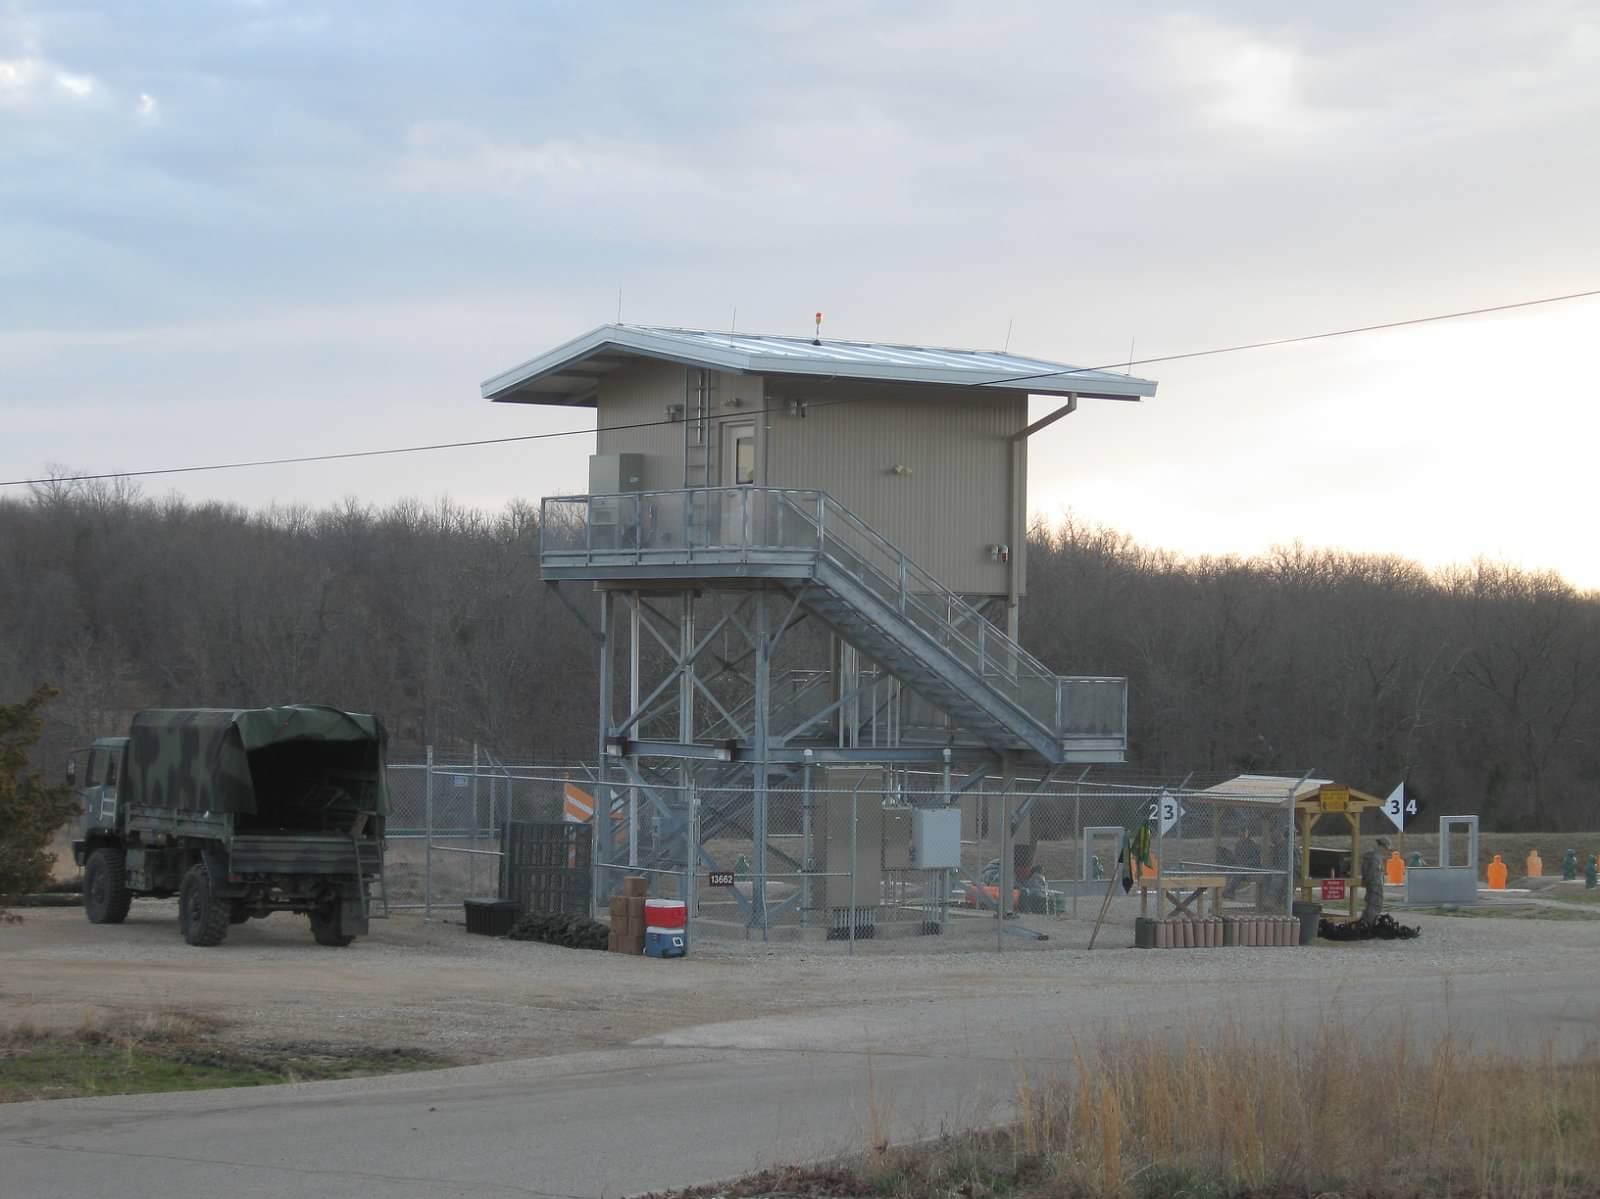 A military checkpoint with a guard tower and a parked truck.